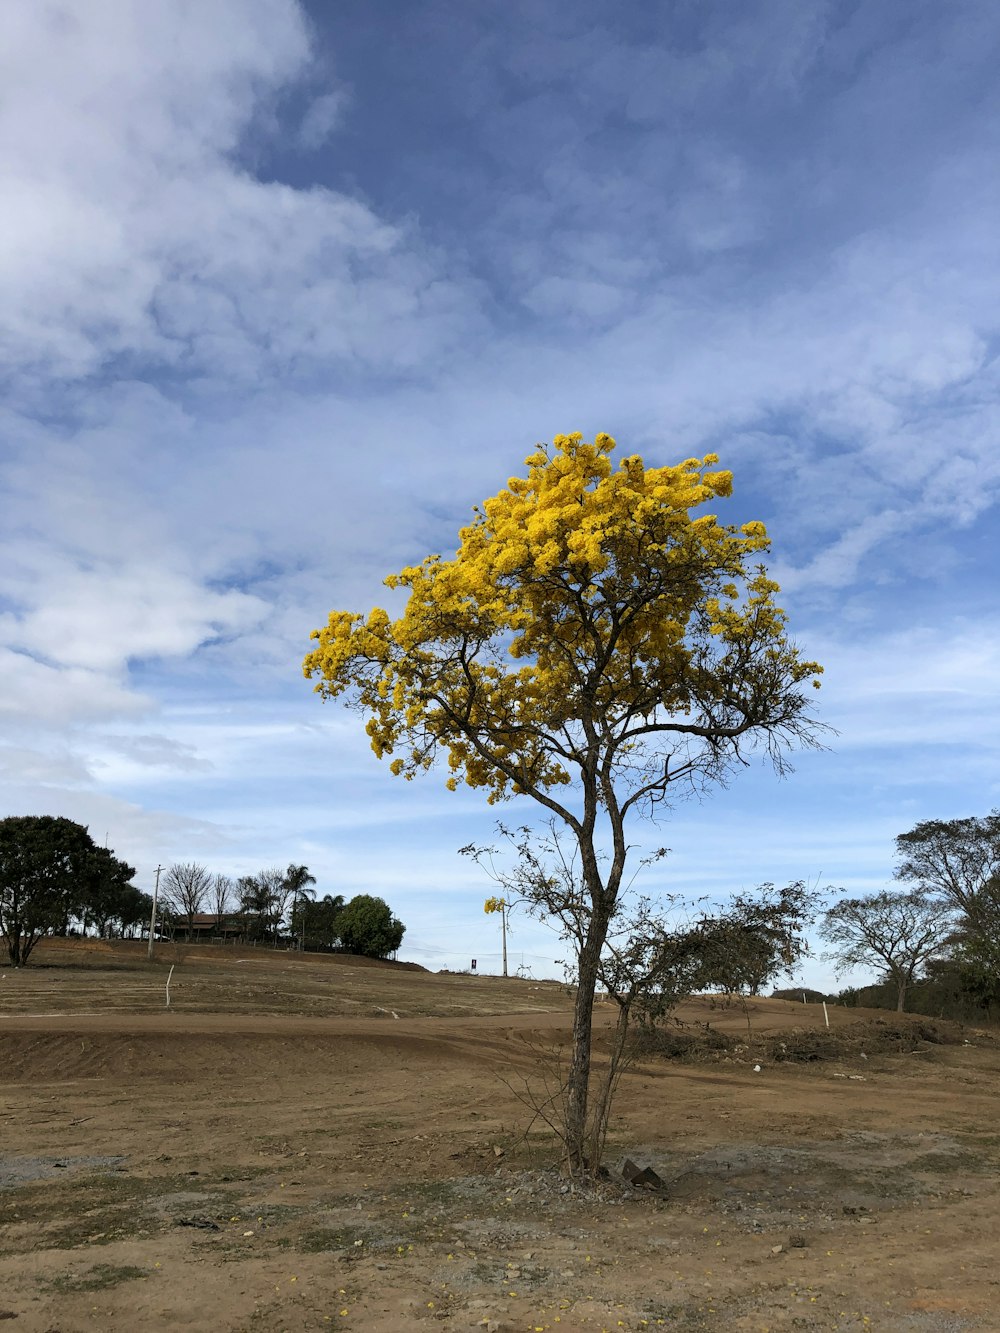 a tree with yellow flowers in the middle of a field